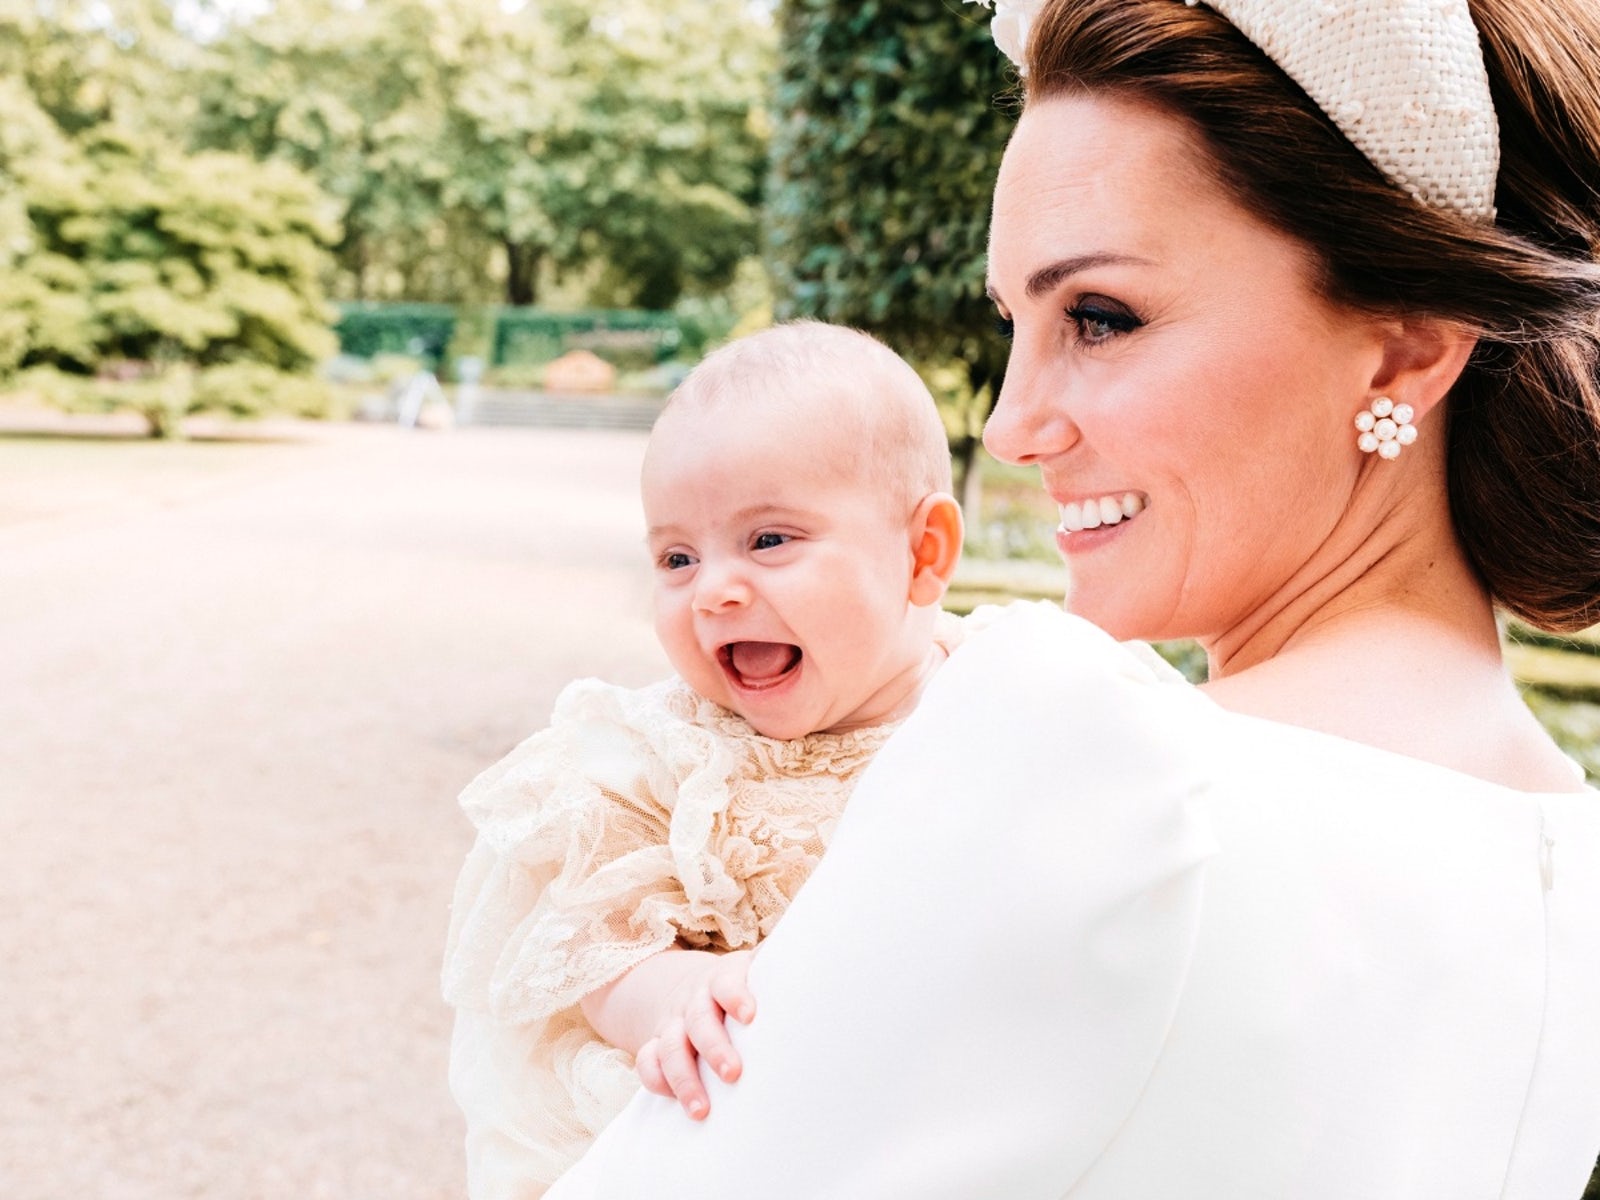 Prince Louis christening photos released by Kensington Palace - Reality TV World